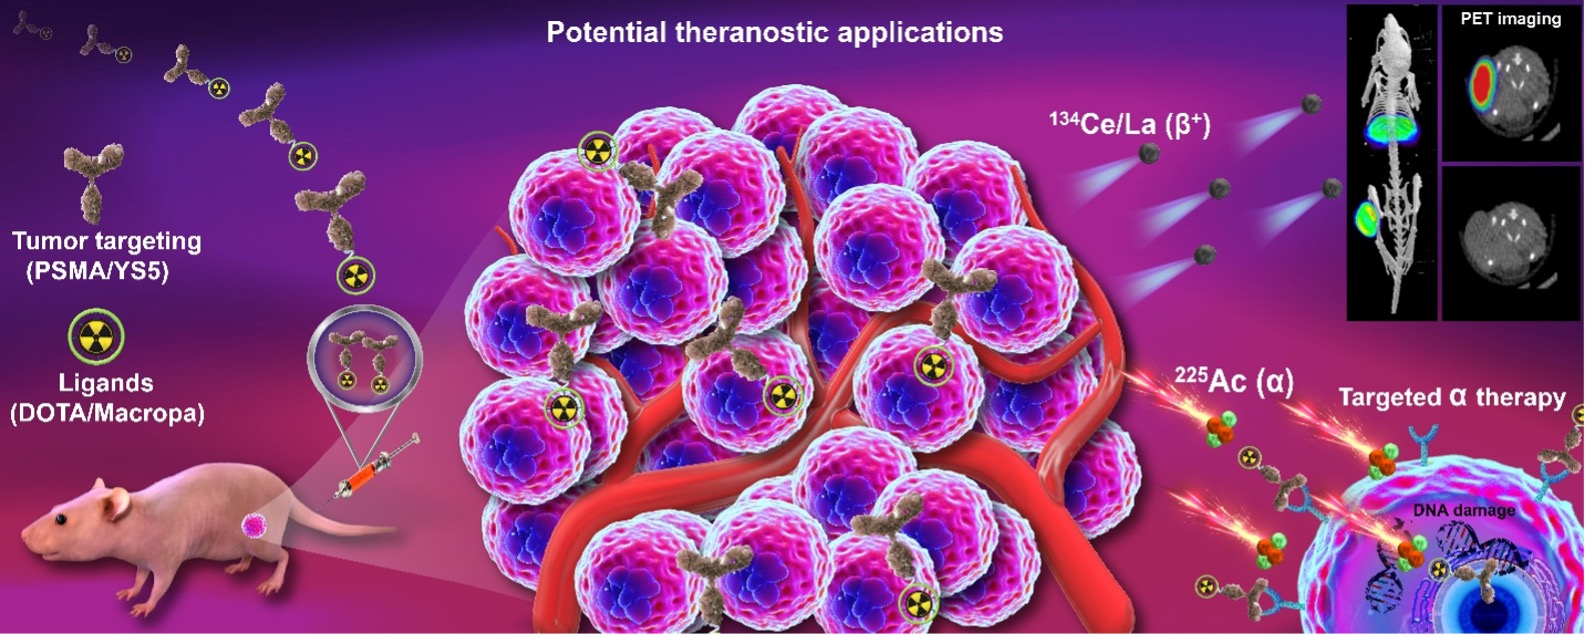 Development of 134Ce/225Ac theranostics for cancer treatment. 134Ce/La-PSMA-617 and Macropa-PEG4-YS5 are theranostic pairs for 225Ac-based radioligand therapies in prostate cancer models, to enable both imaging and treatment.